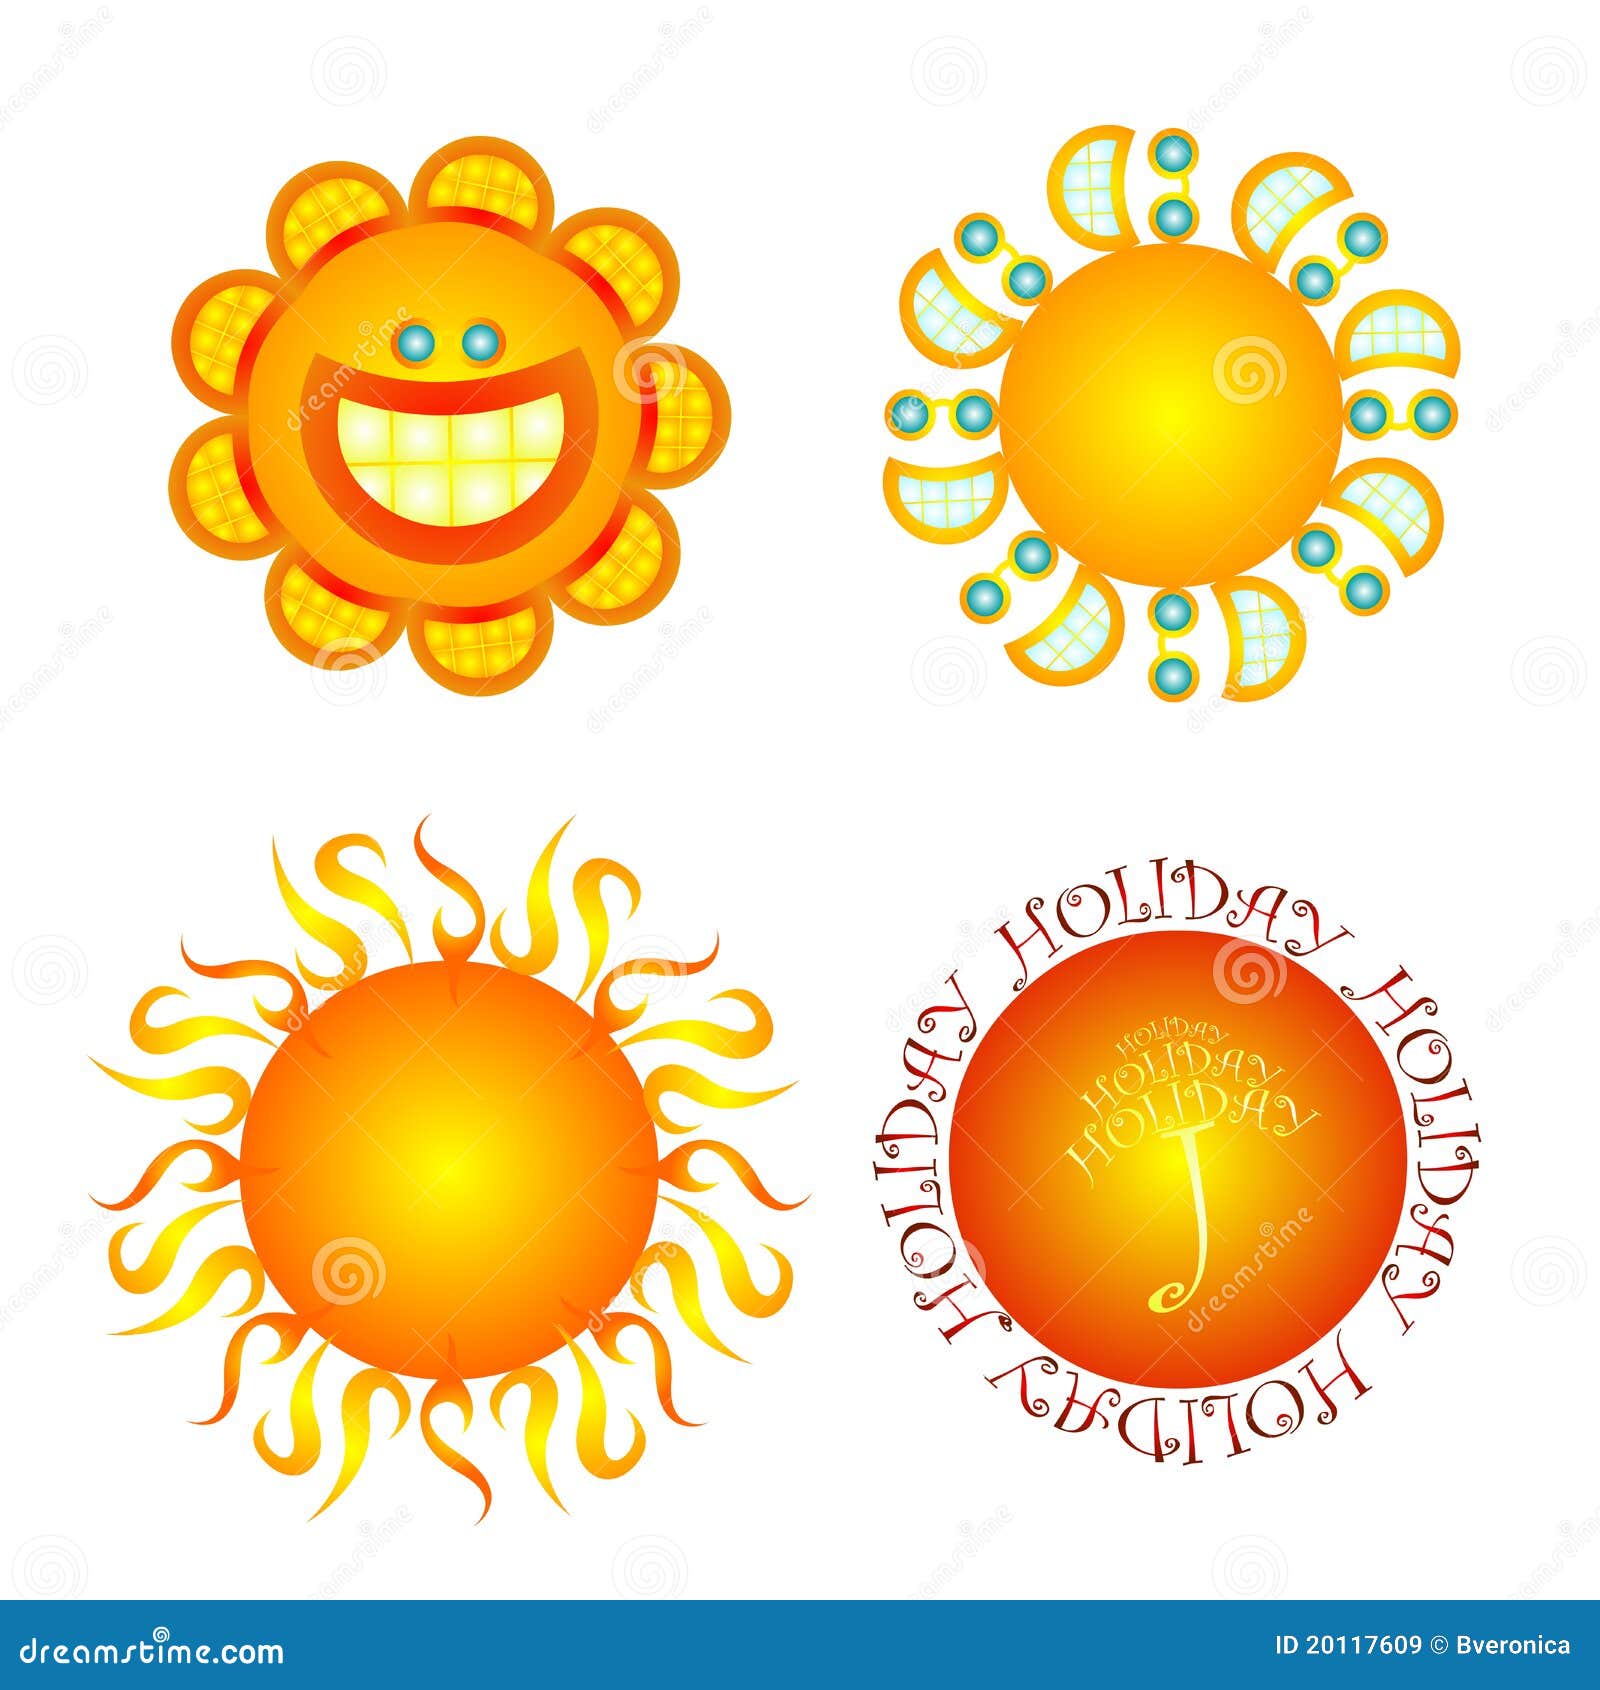 Summer Sun Royalty Free Stock Images - Image: 20117609